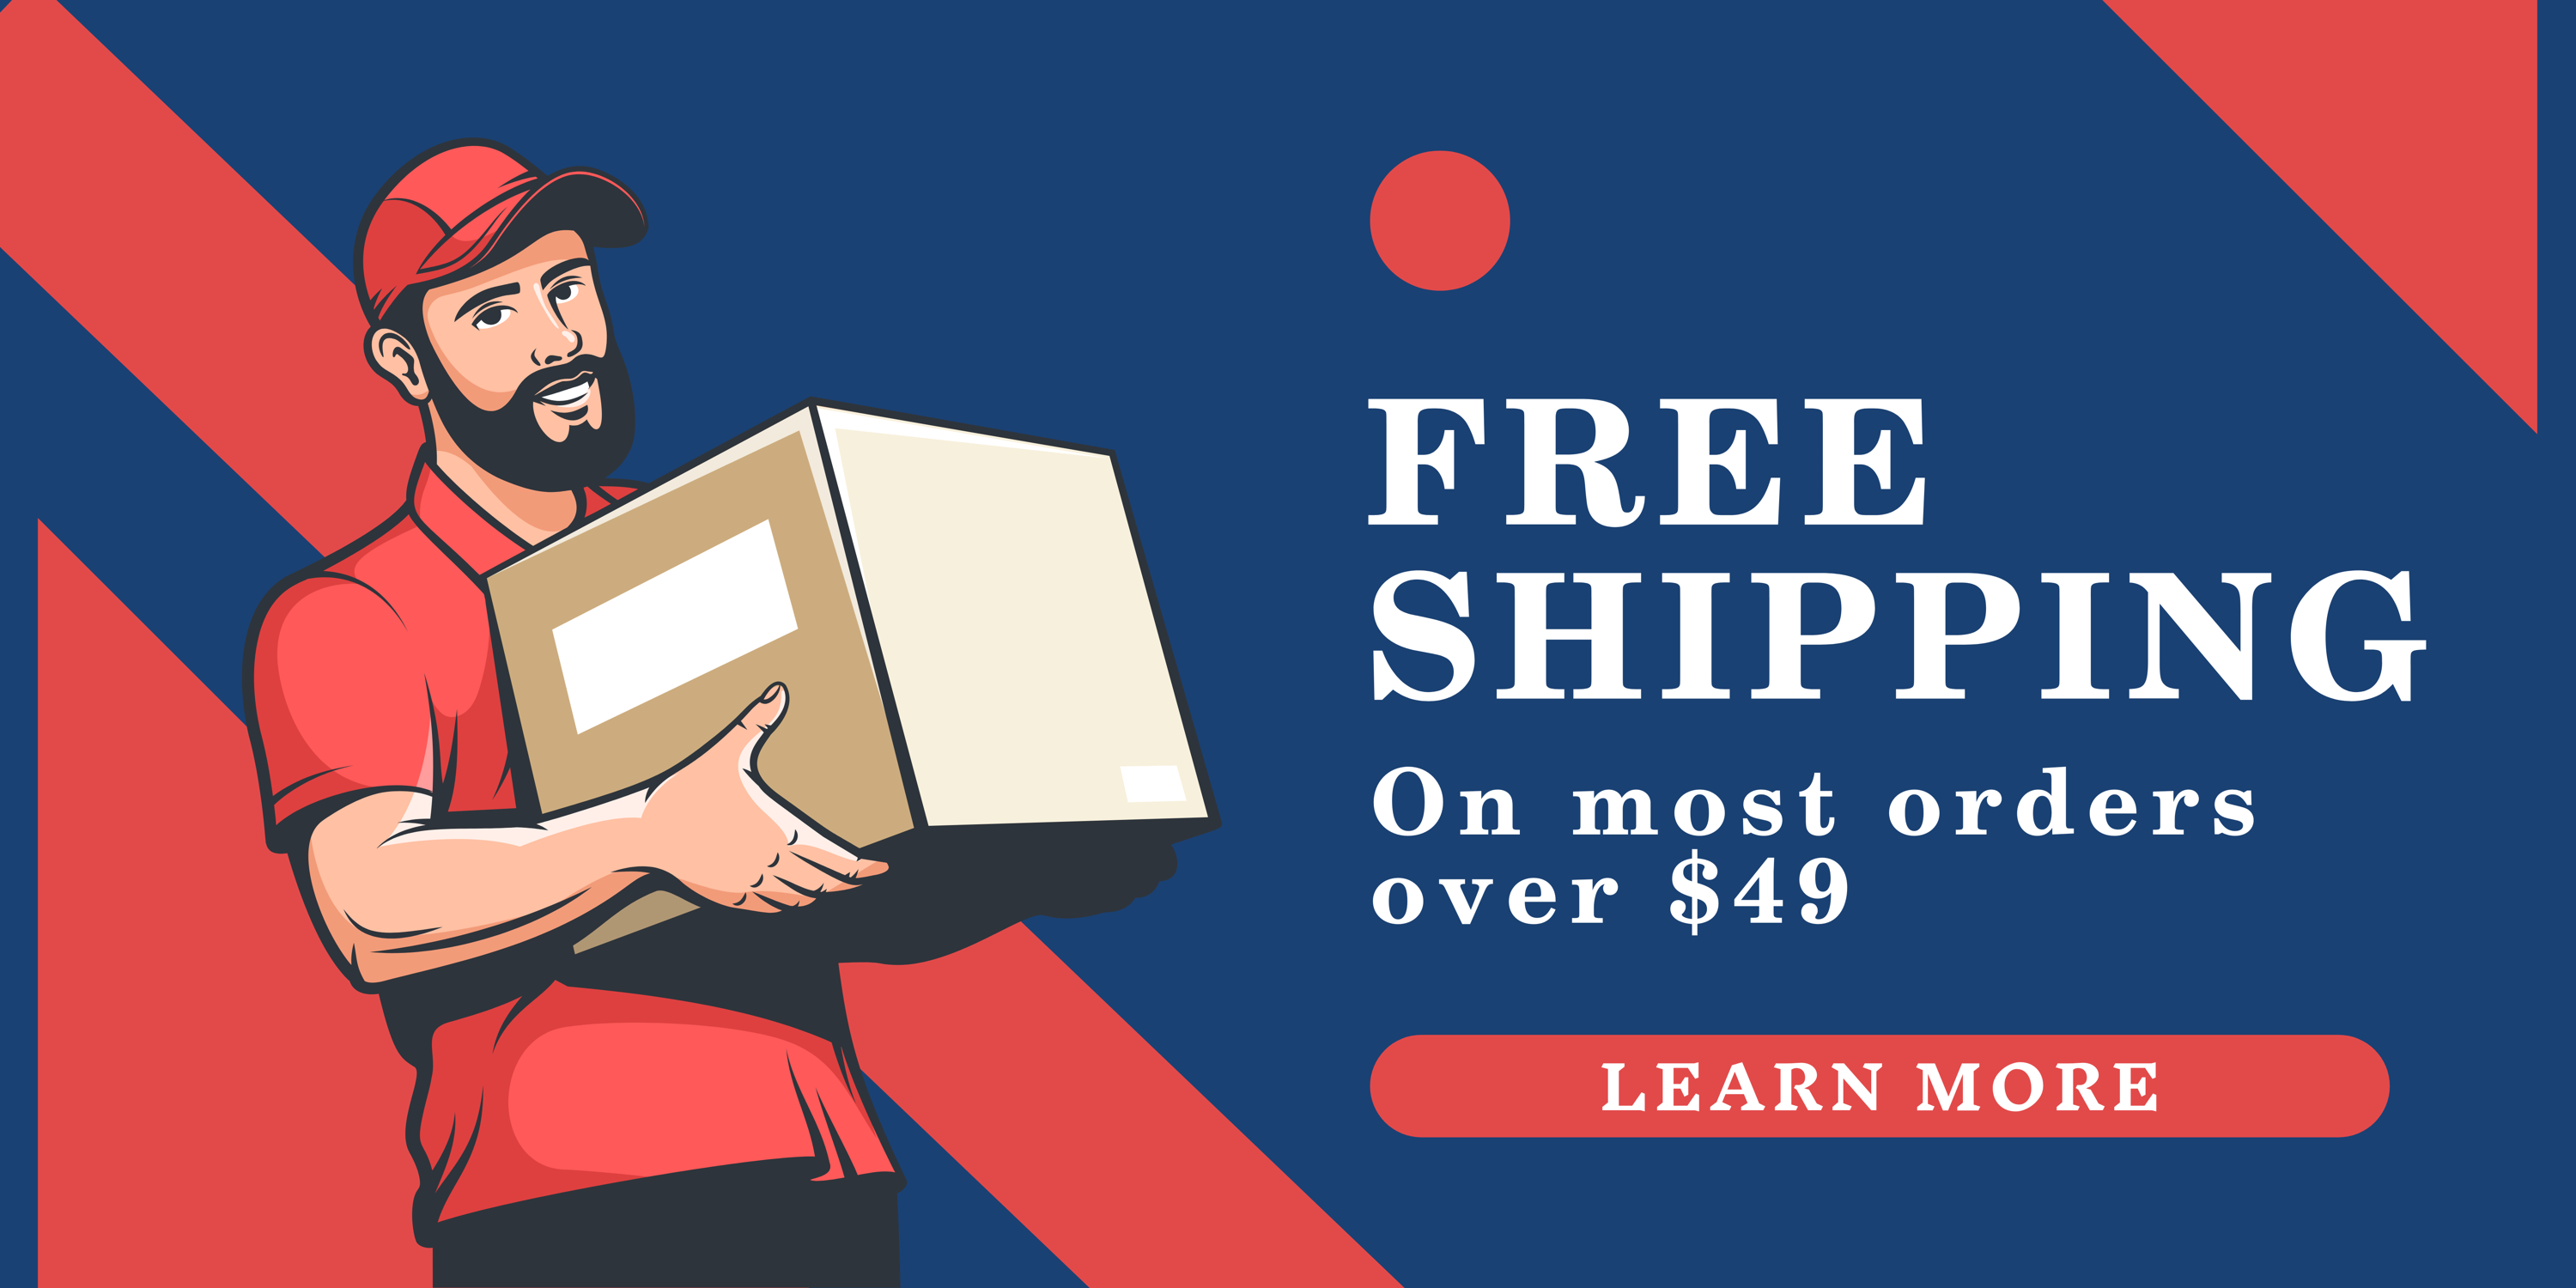 Free Shipping Orders Over $49